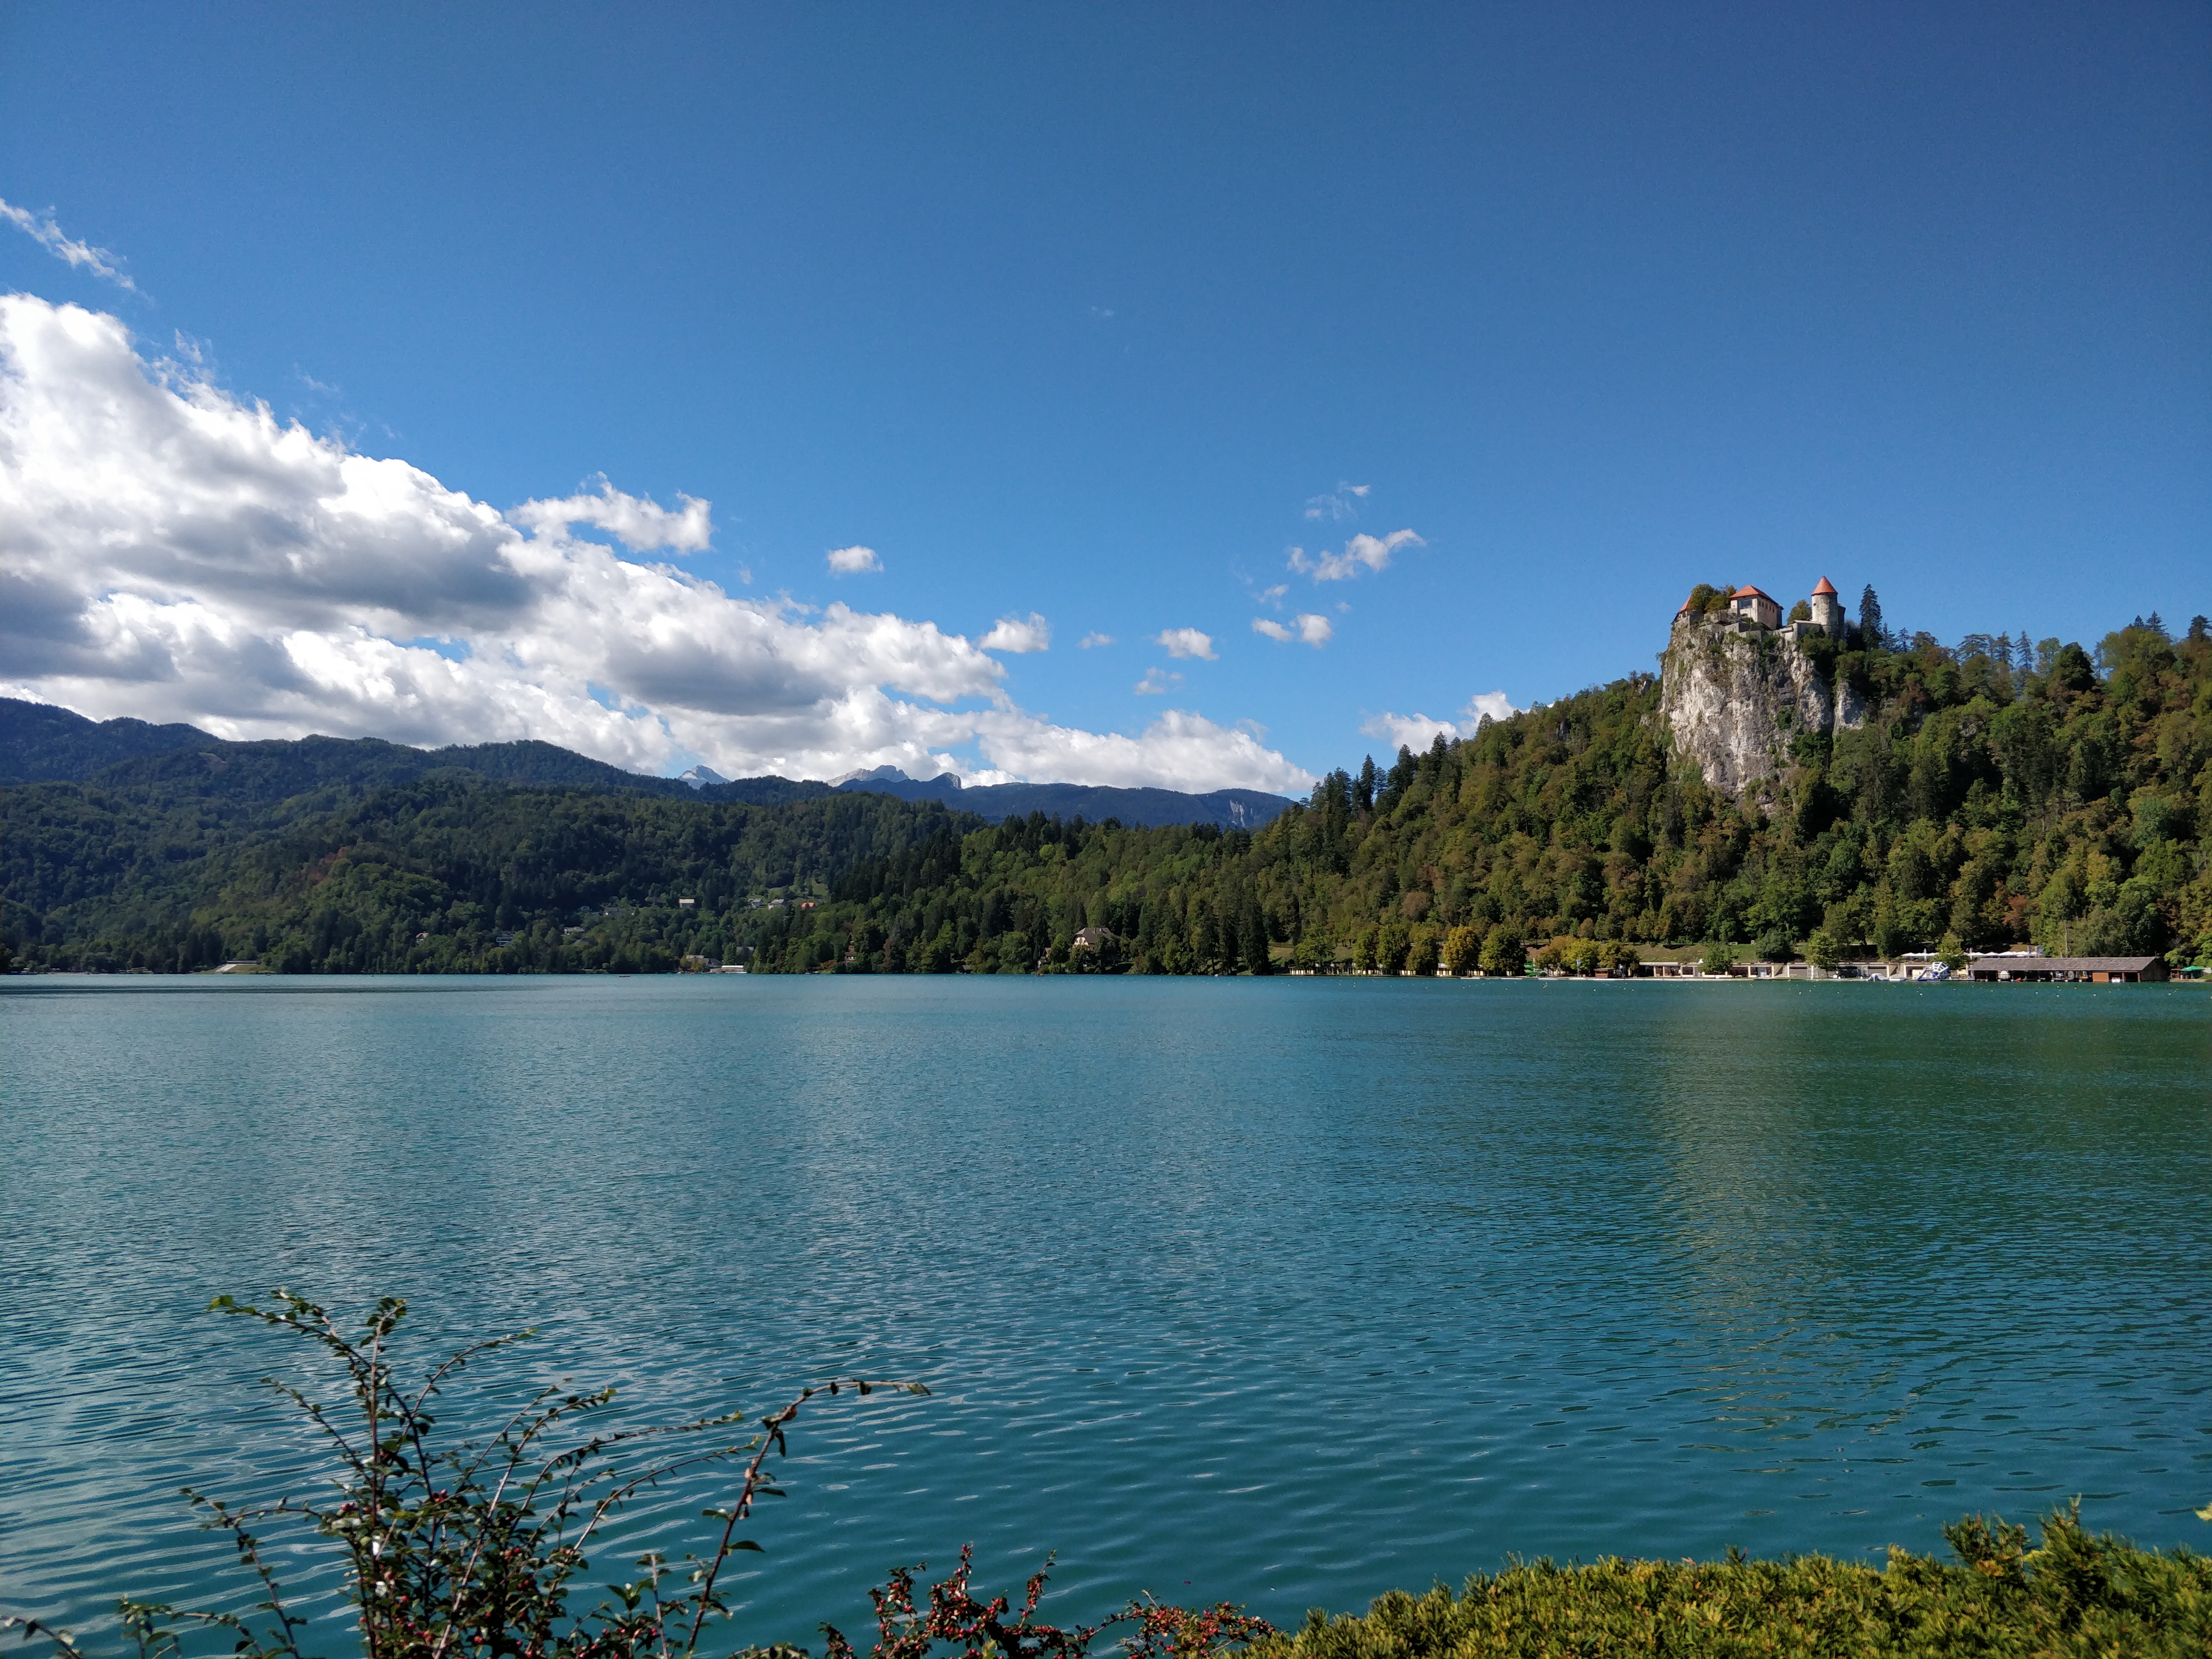 An image of Lake Bled used as a background image for this website